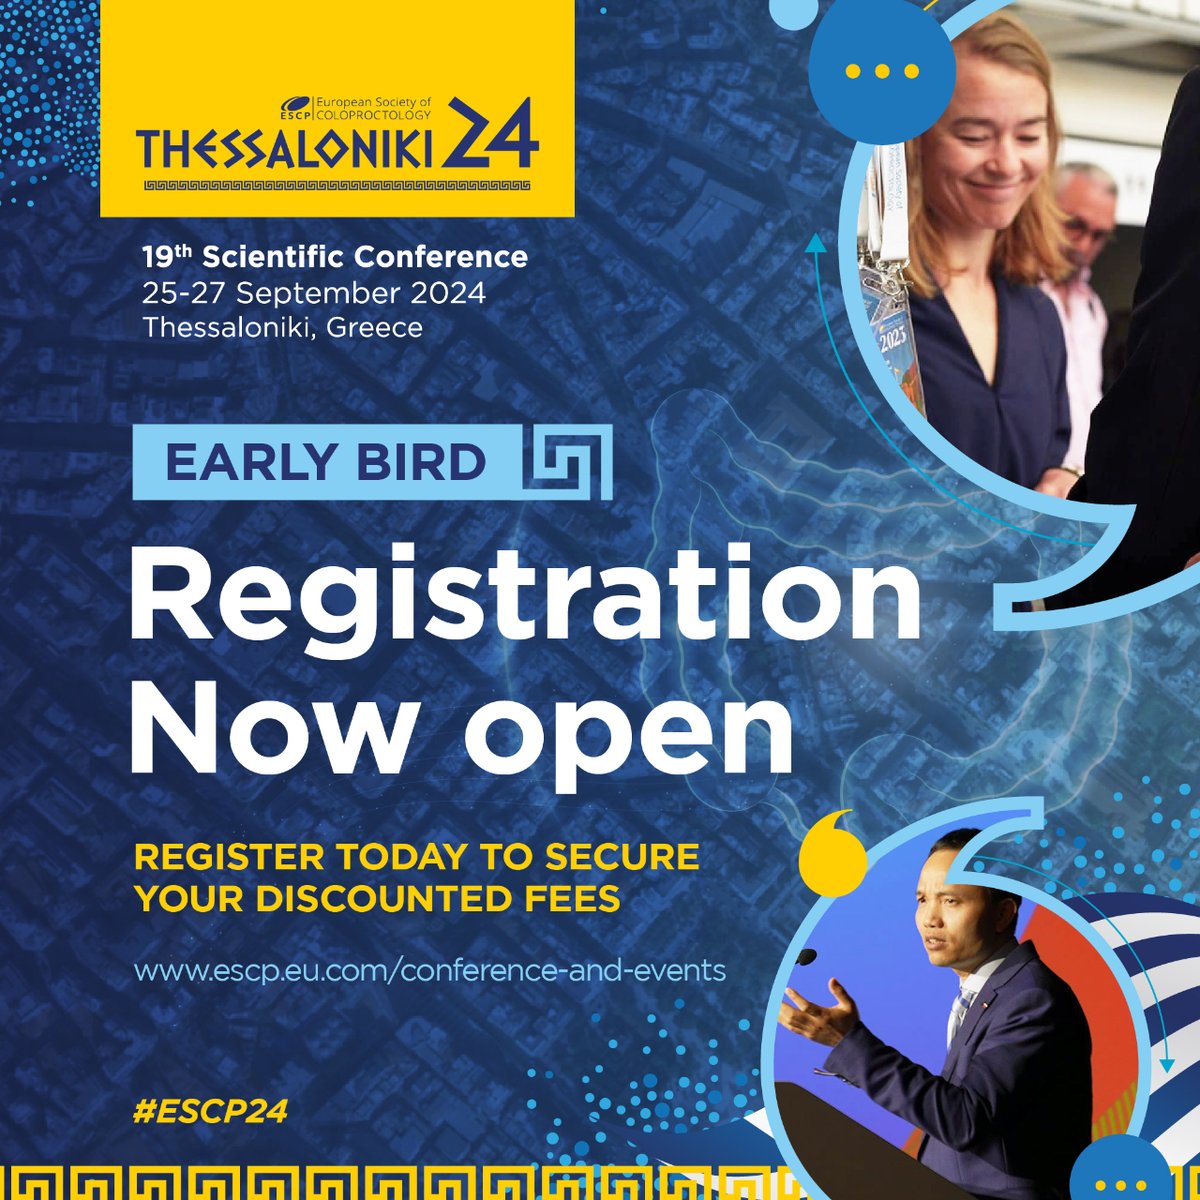 📢 Remember registration for #ESCP24 is OPEN!  Register today to save up to €200 with our early bird discount👇 i.mtr.cool/eqcxageois #ColorectalSurgery #ColorectalSurgeon #Coloproctology